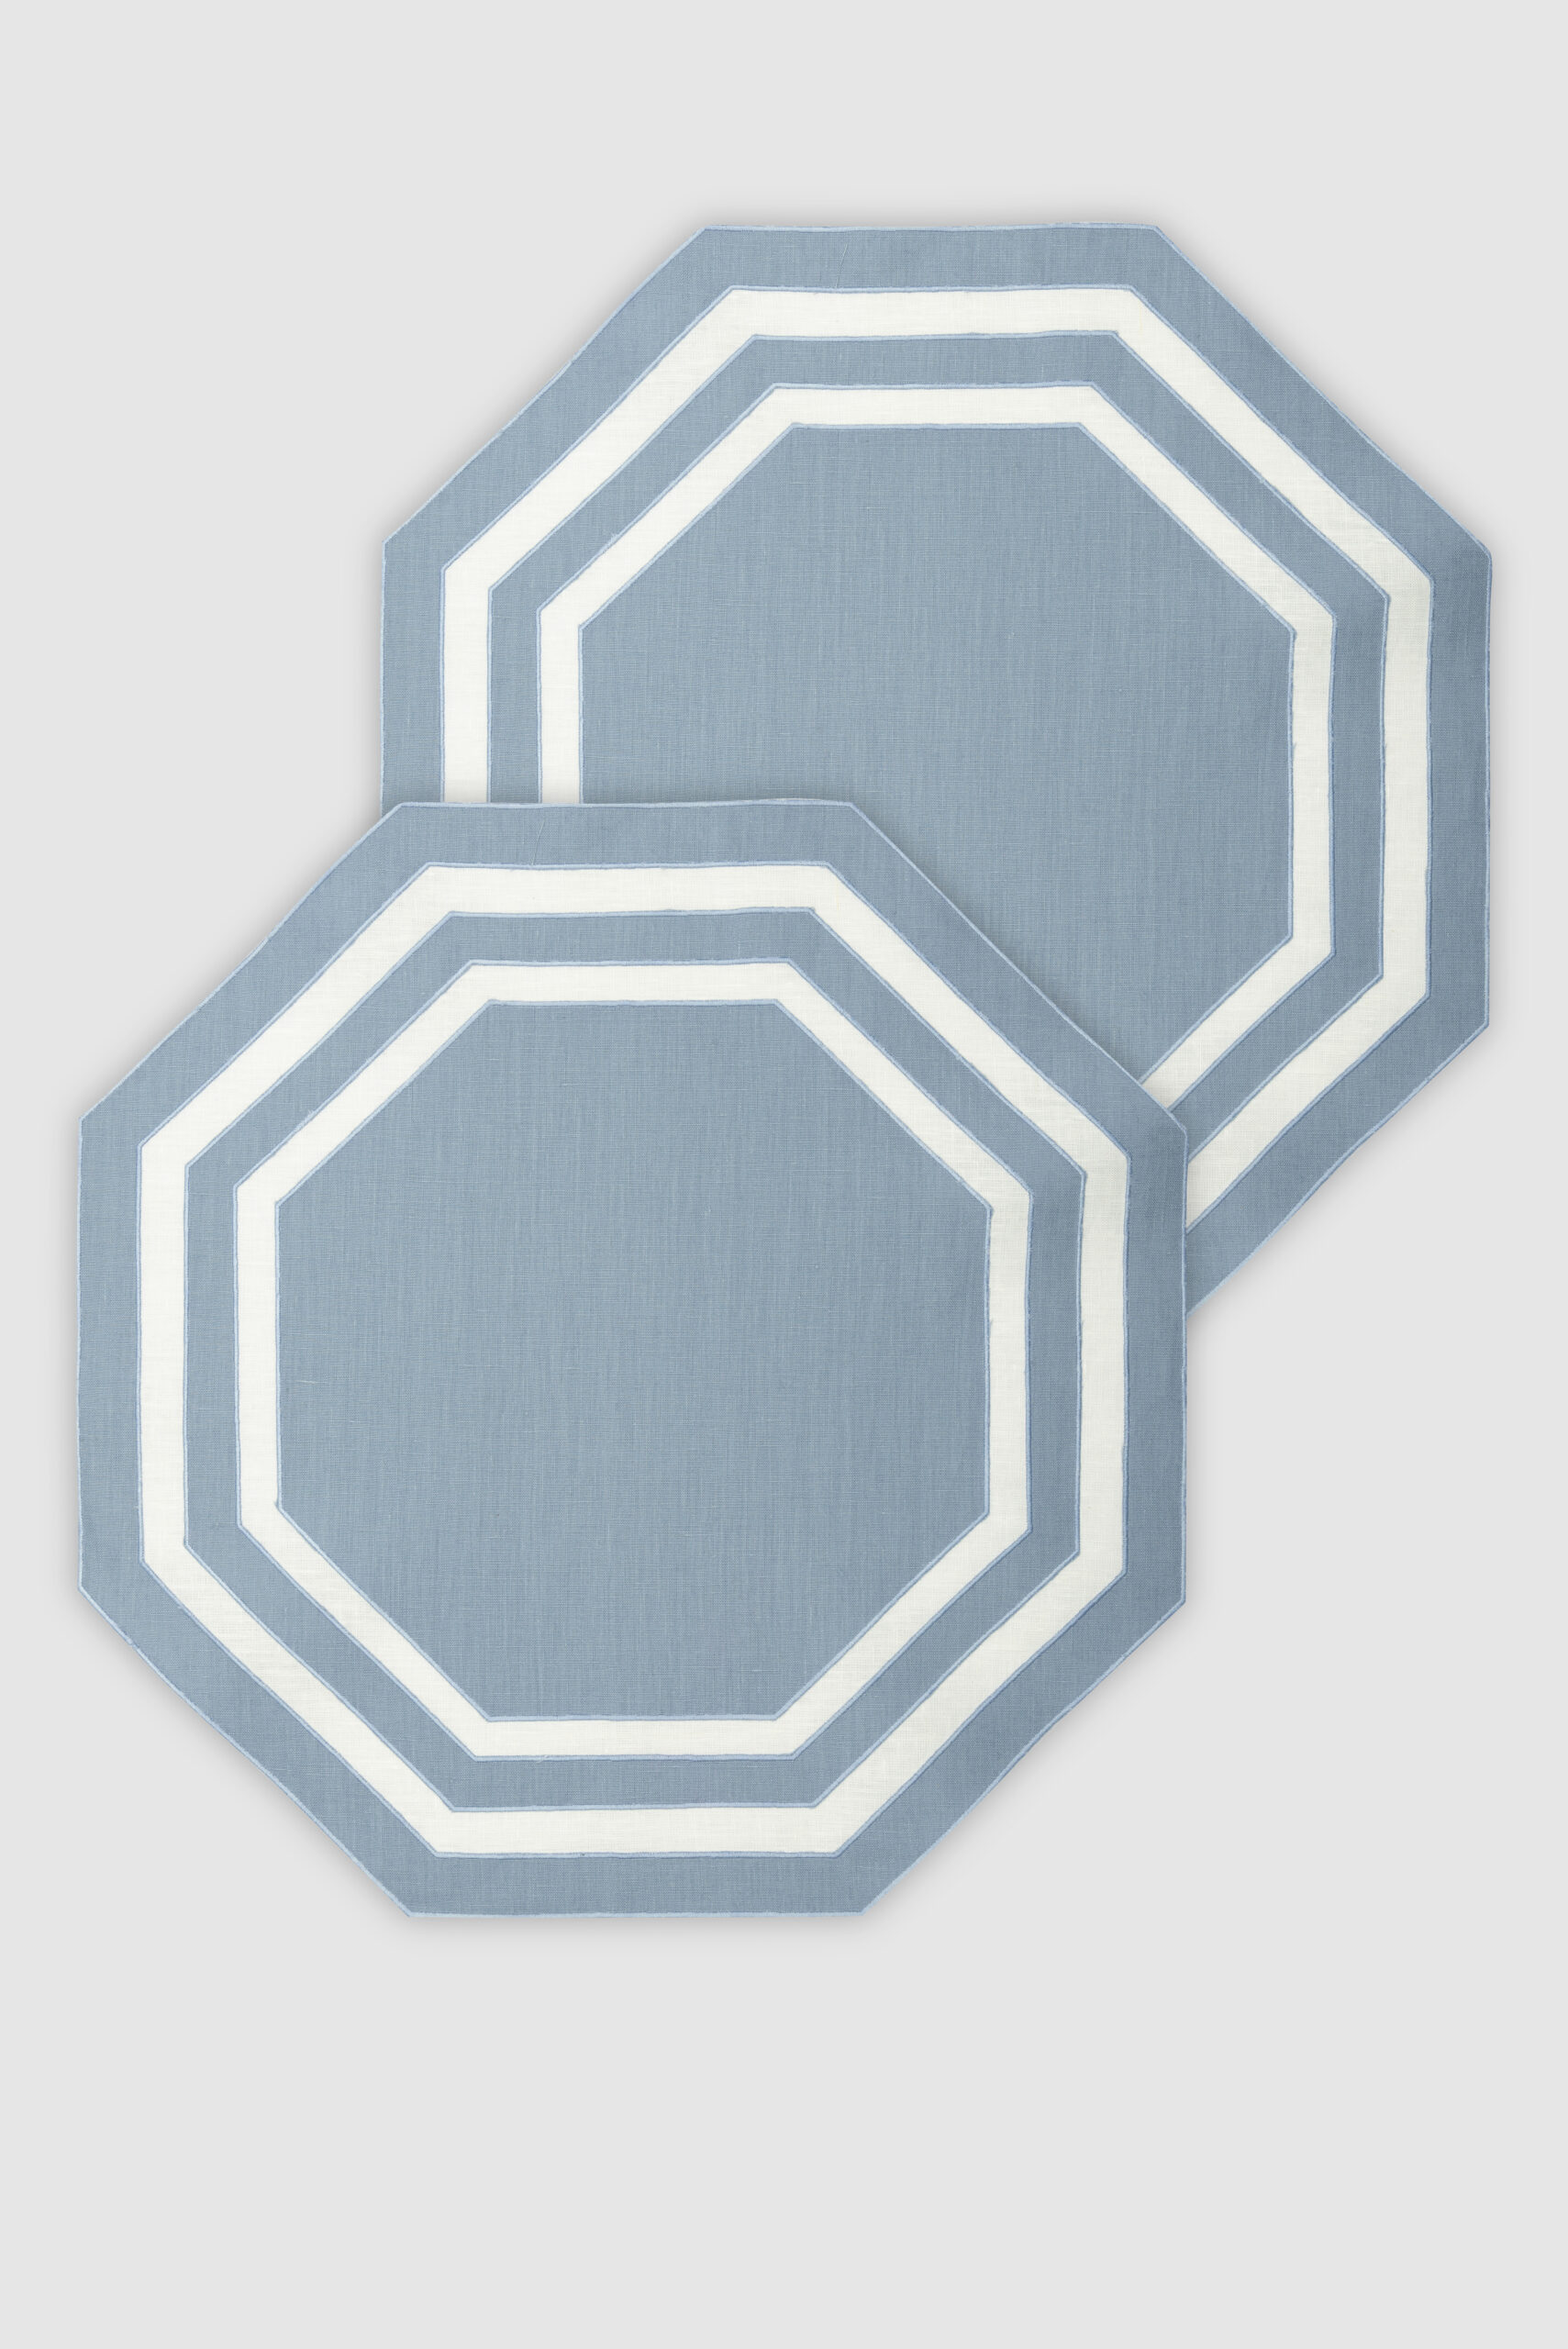 octo slate blue placemat